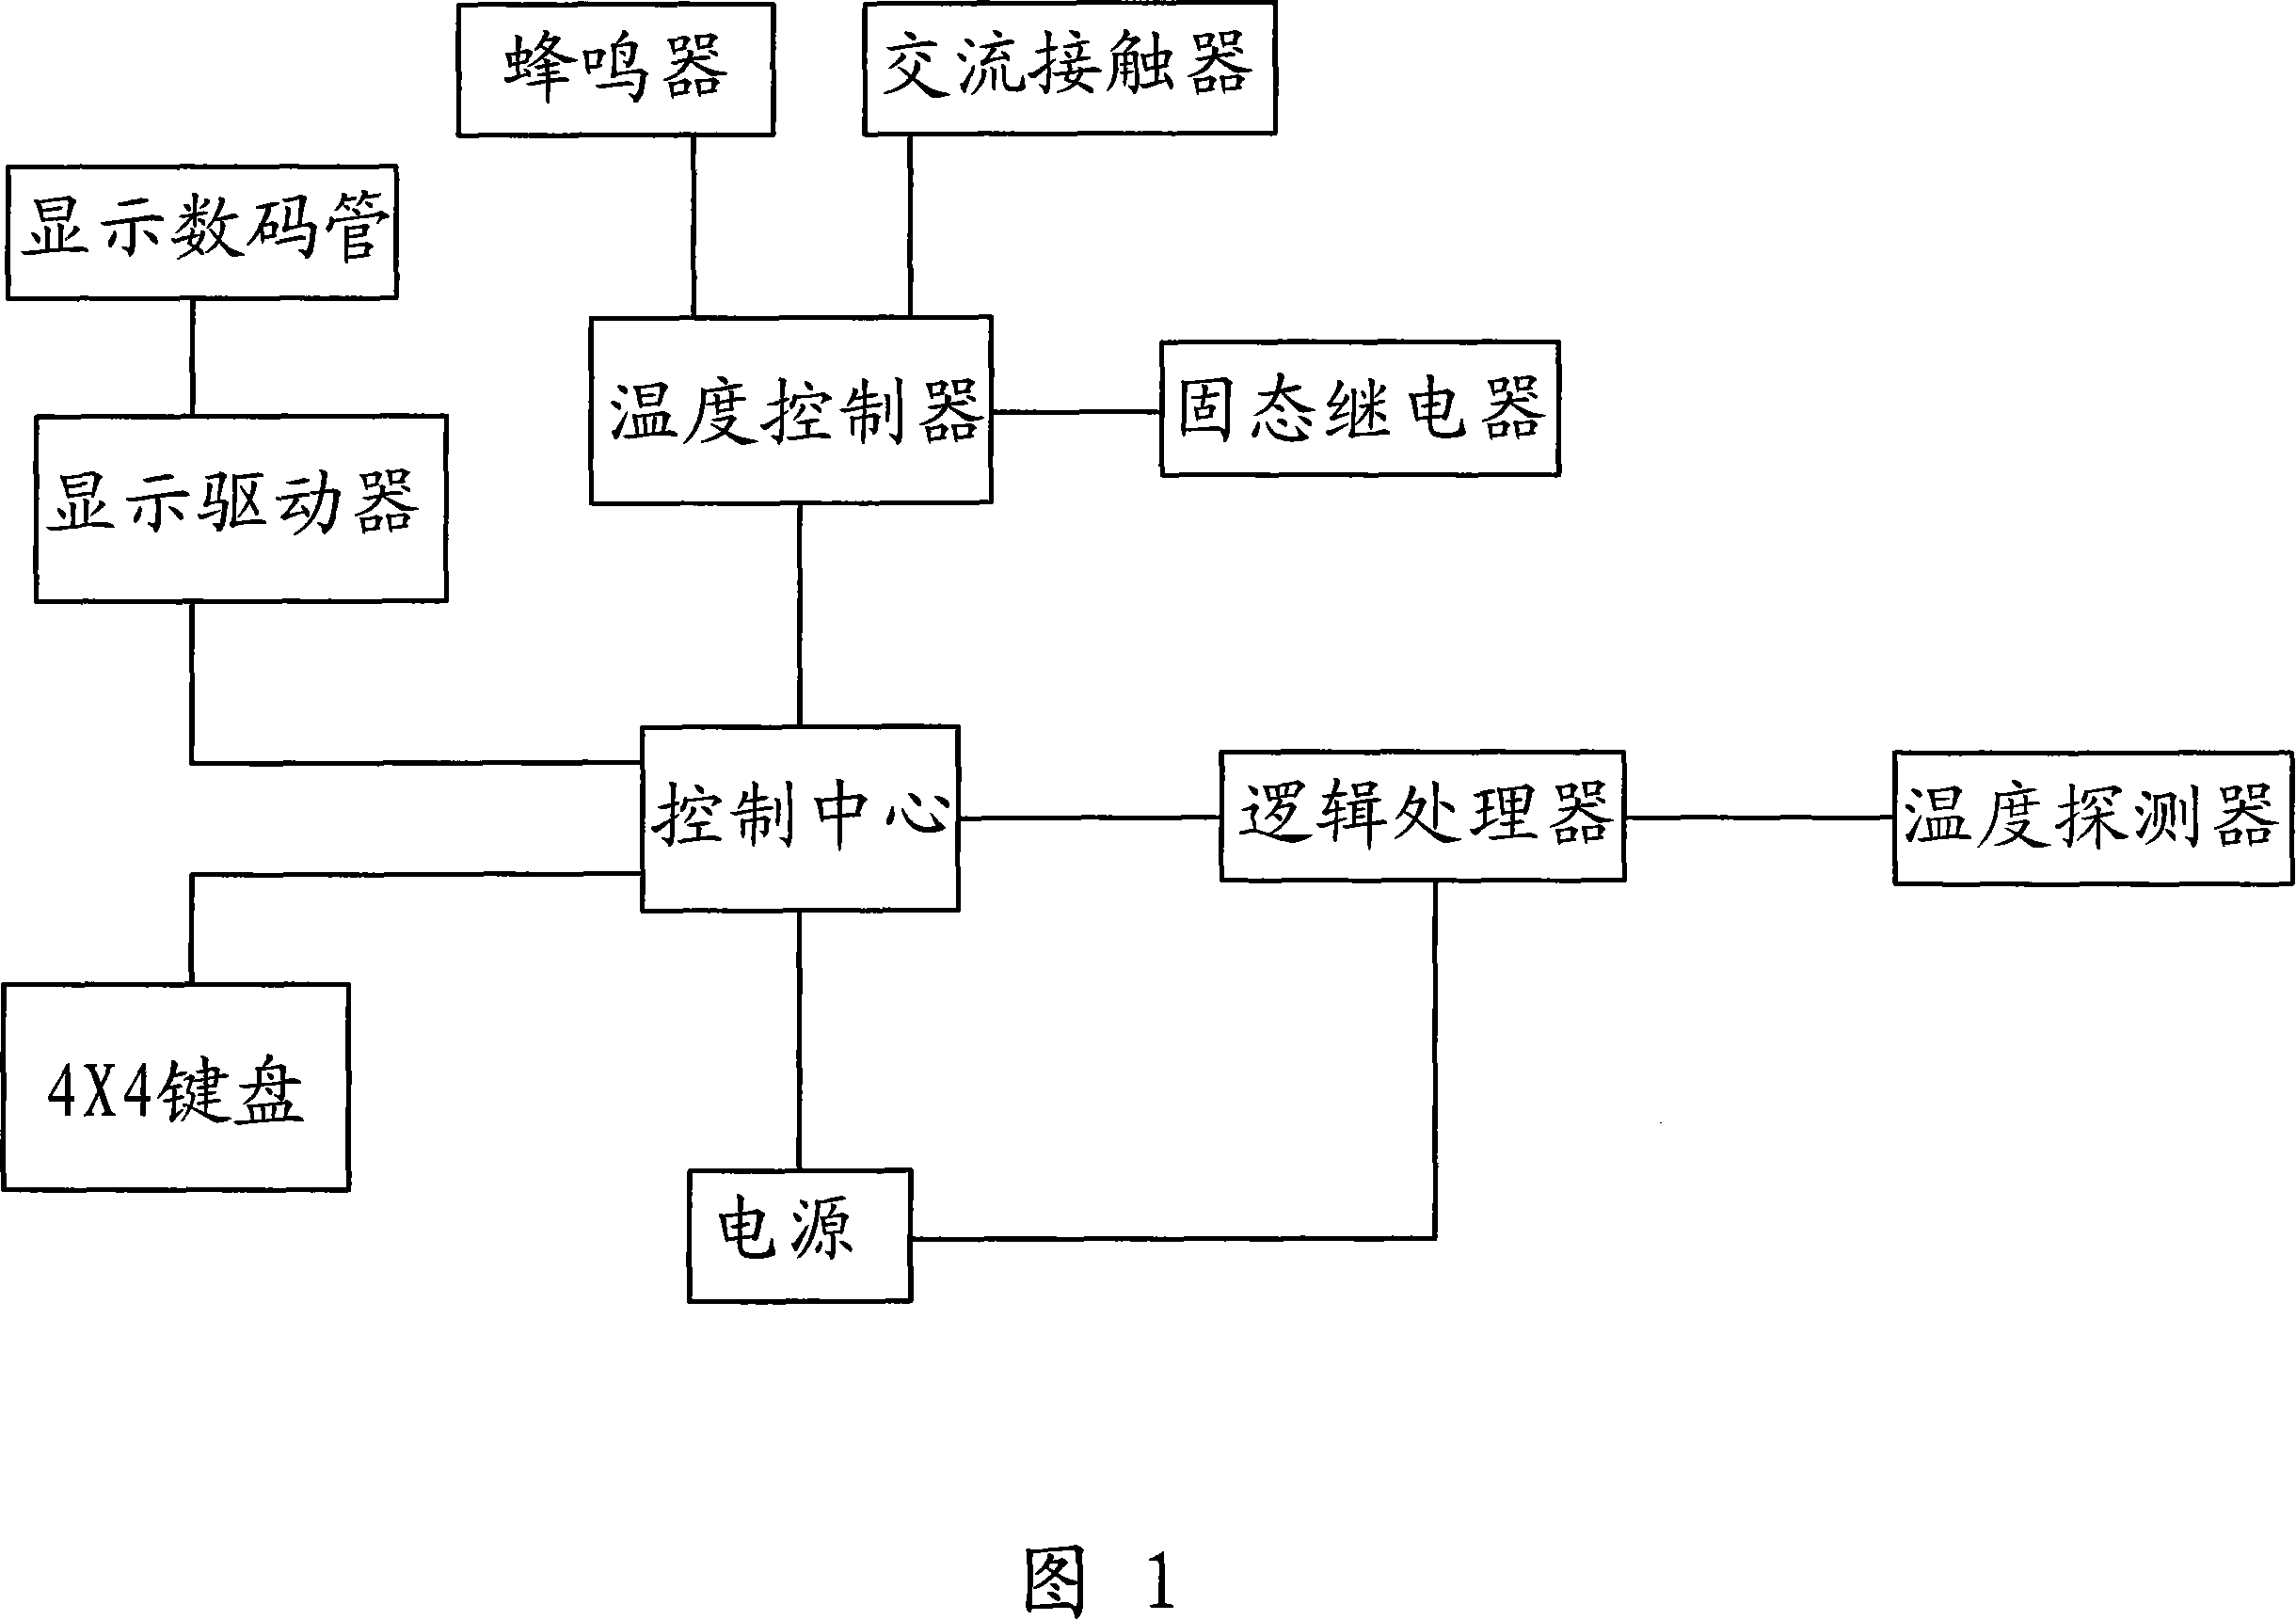 Electric-frying oven temperature control circuit